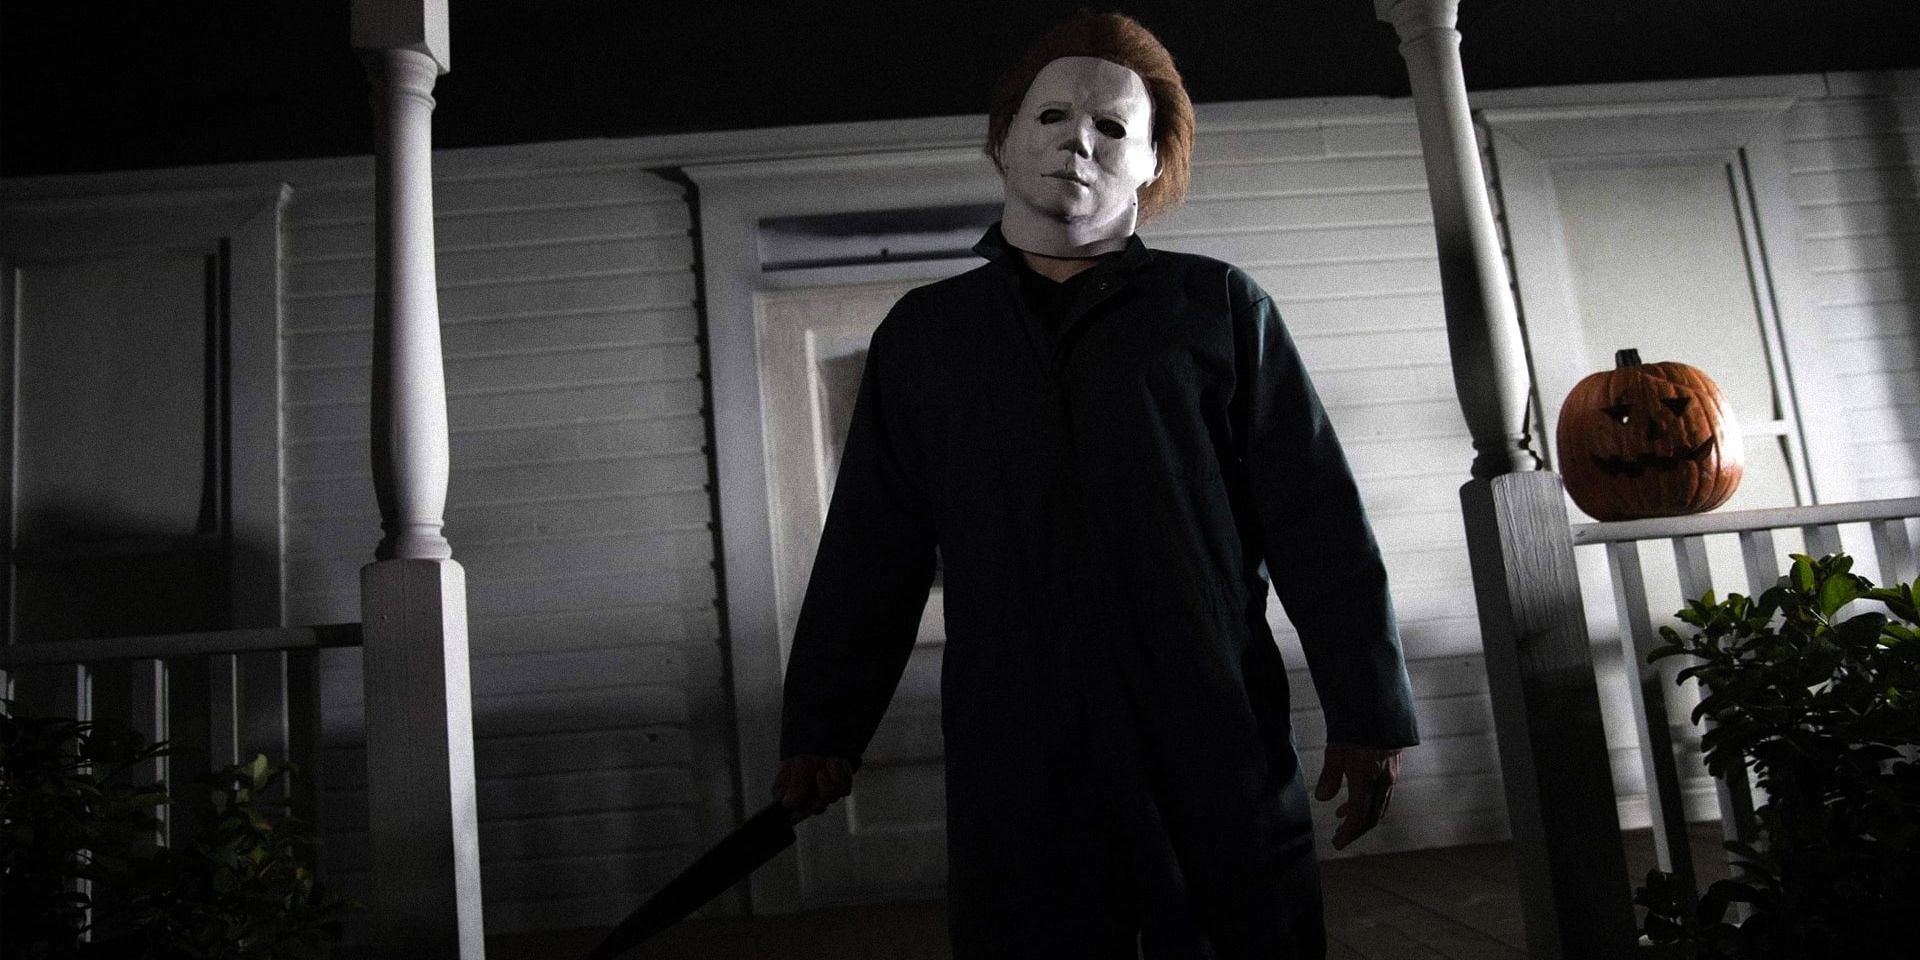 Michael Myers from the Halloween movie franchise.